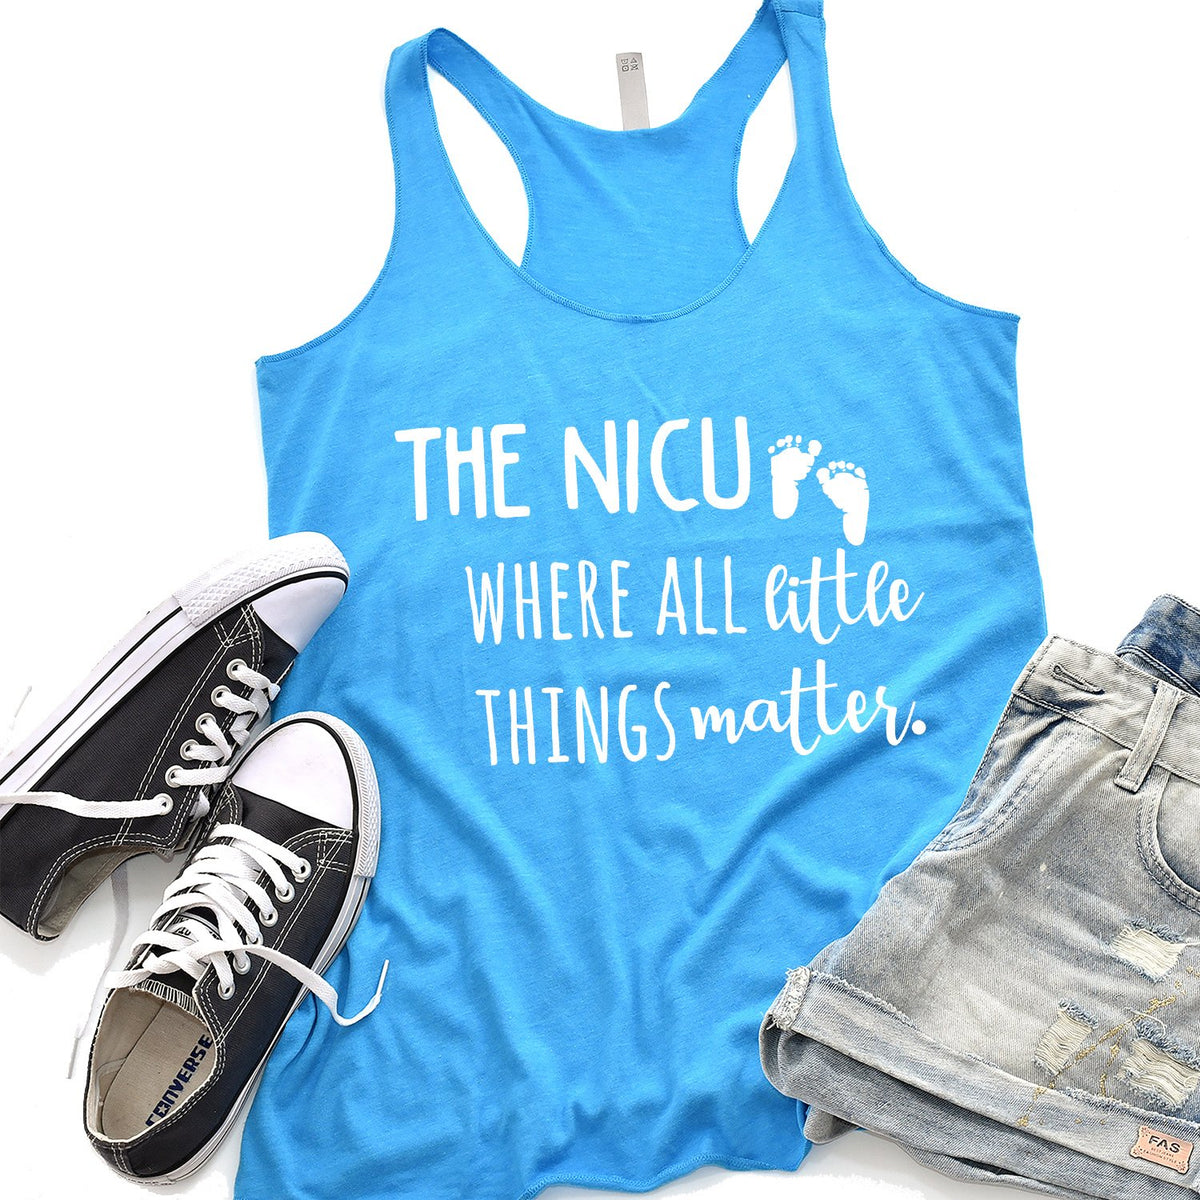 The NICU Where All Little Things Matter - Tank Top Racerback